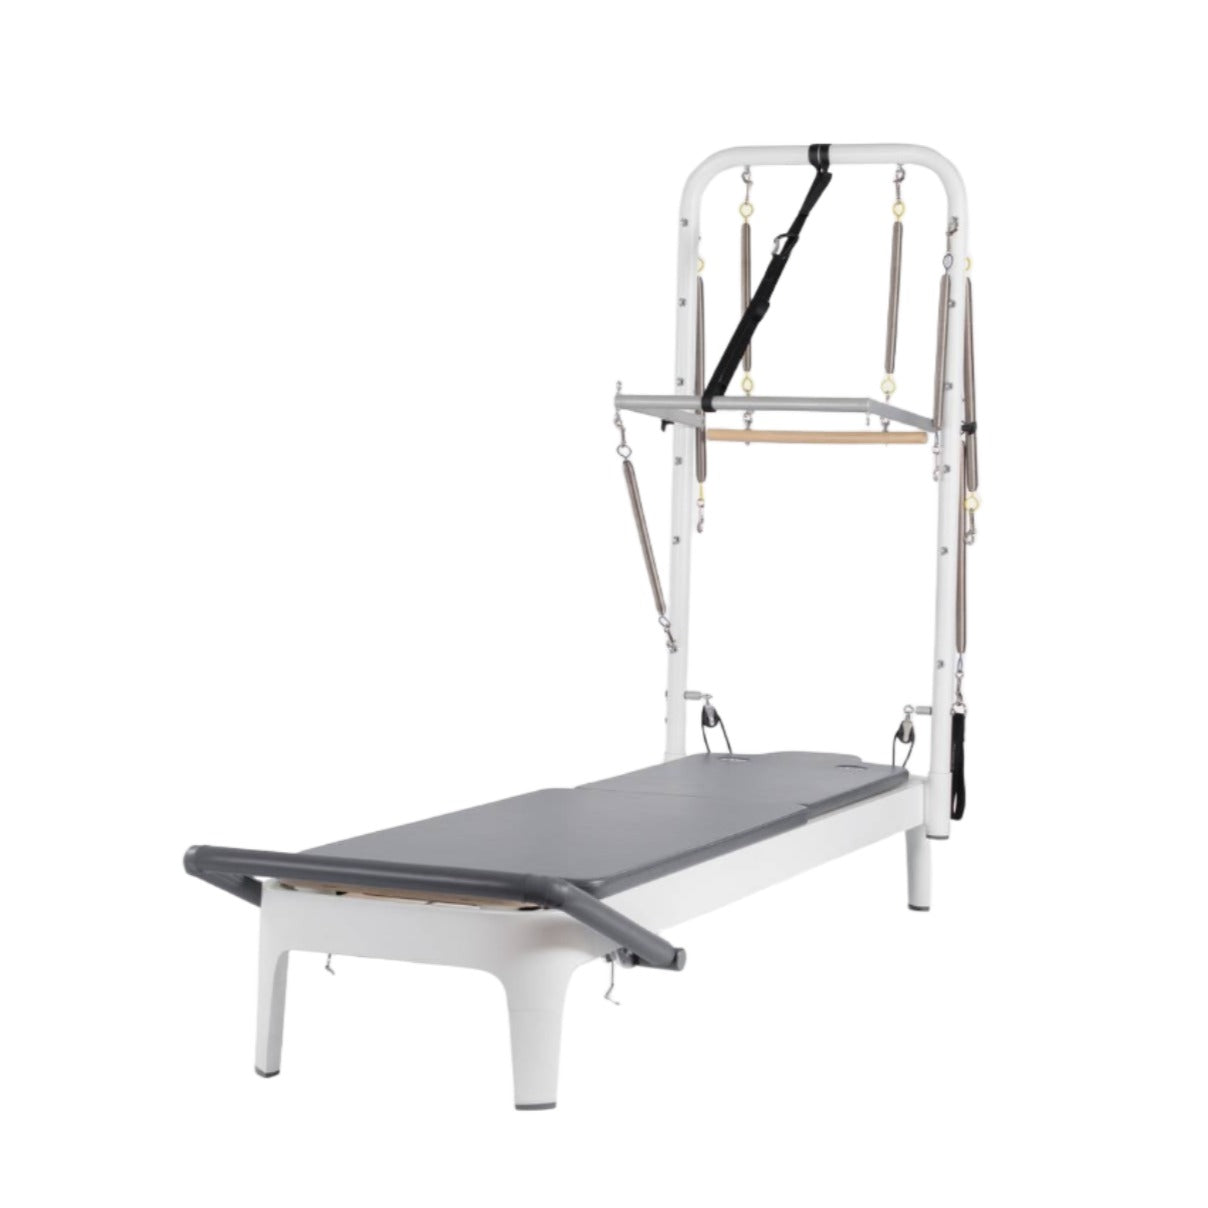 Balanced Body Allegro 2 Reformer with Tower and Mat – Northern Fitness